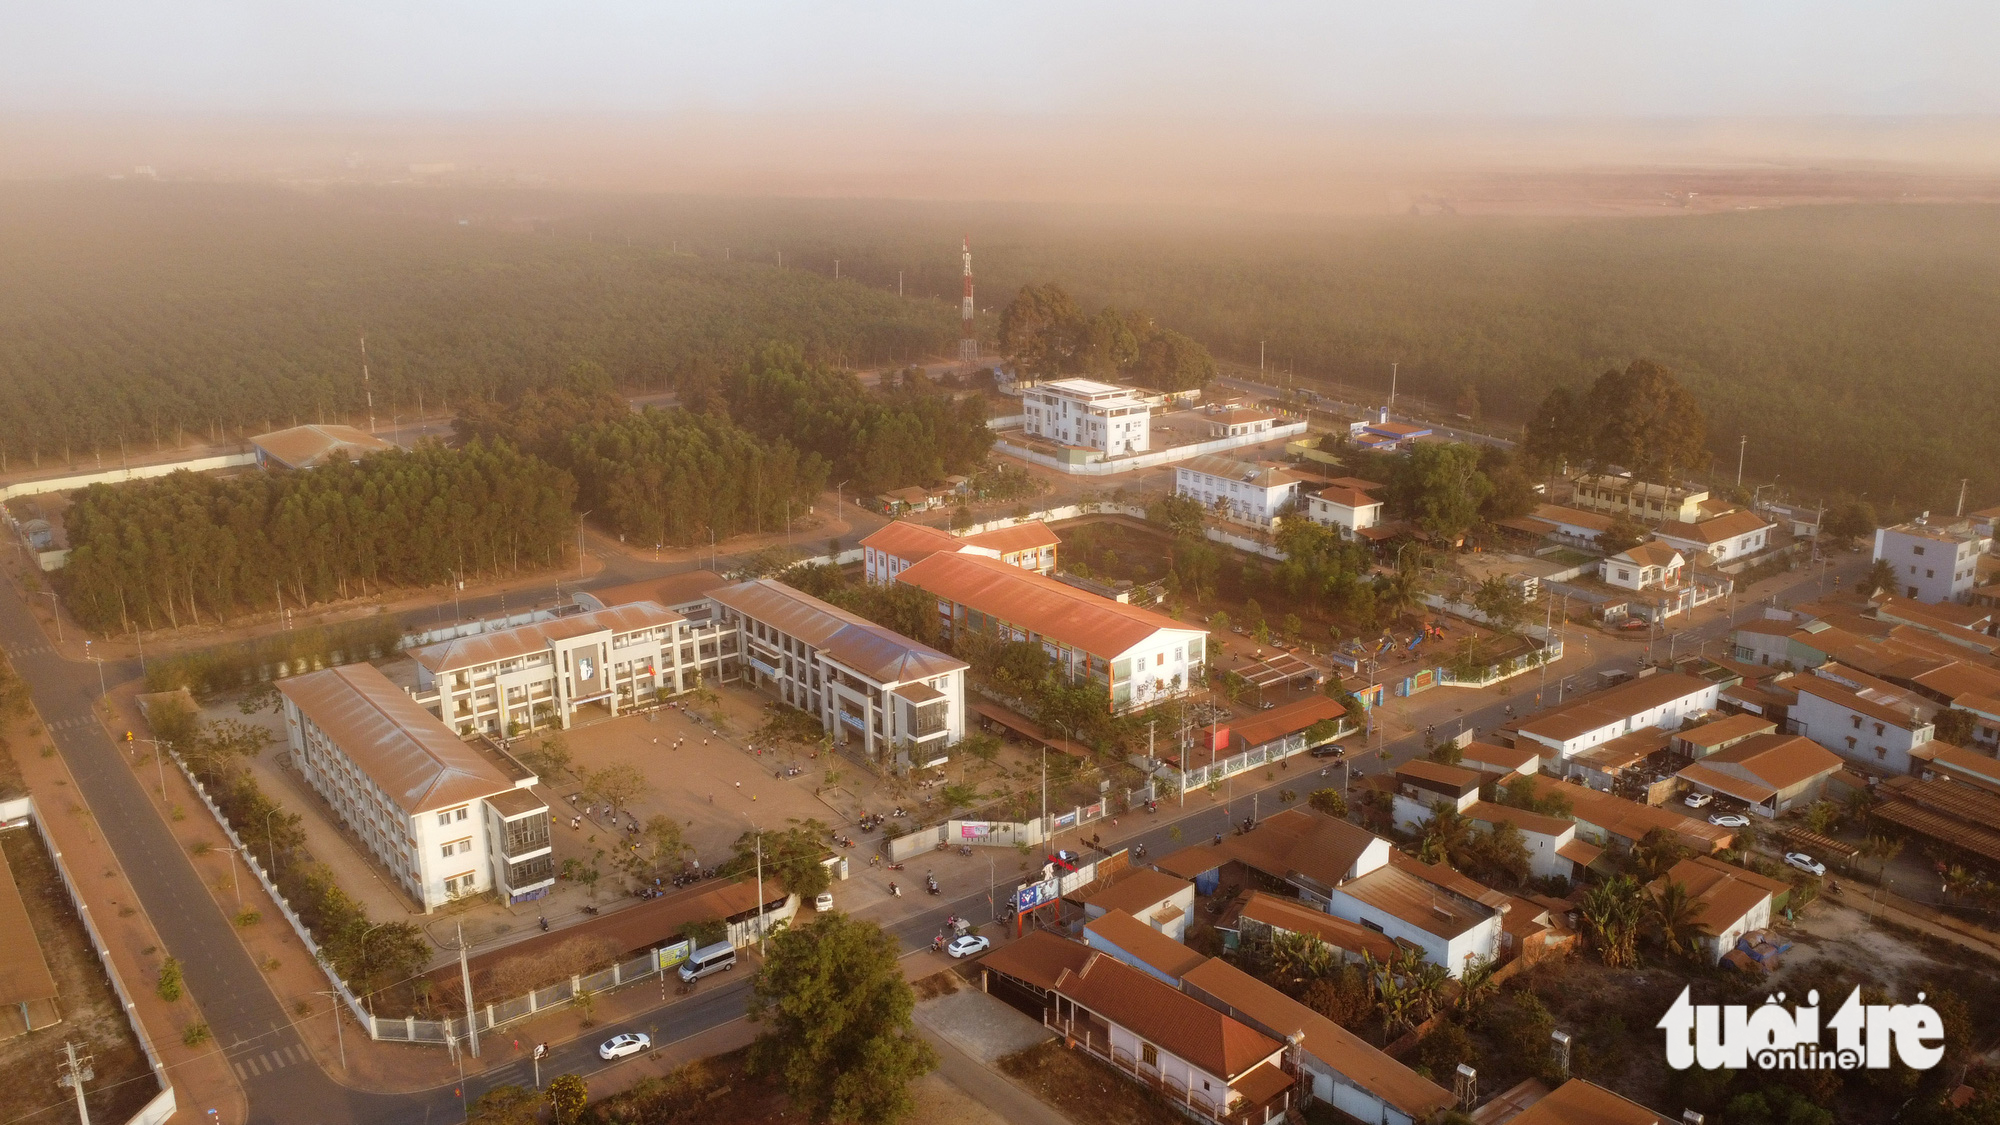 Dust blankets expressway, houses near giant airport construction project in southern Vietnam